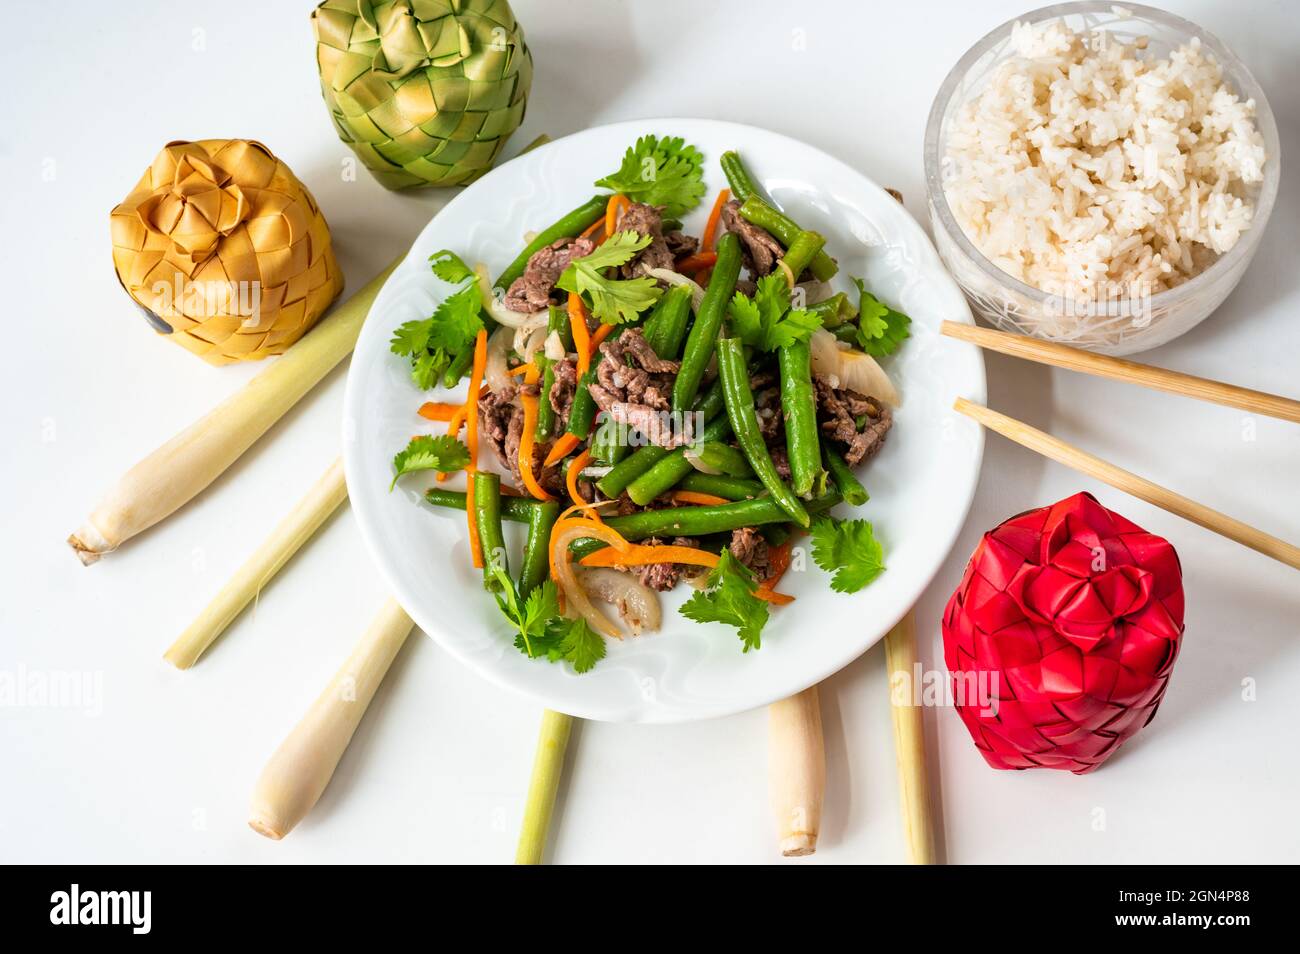 Food background with vietnamese meal, plate with fried beef with green bean and rice, lemon grass, chopstick and 3 color bamboo box on white backgroun Stock Photo